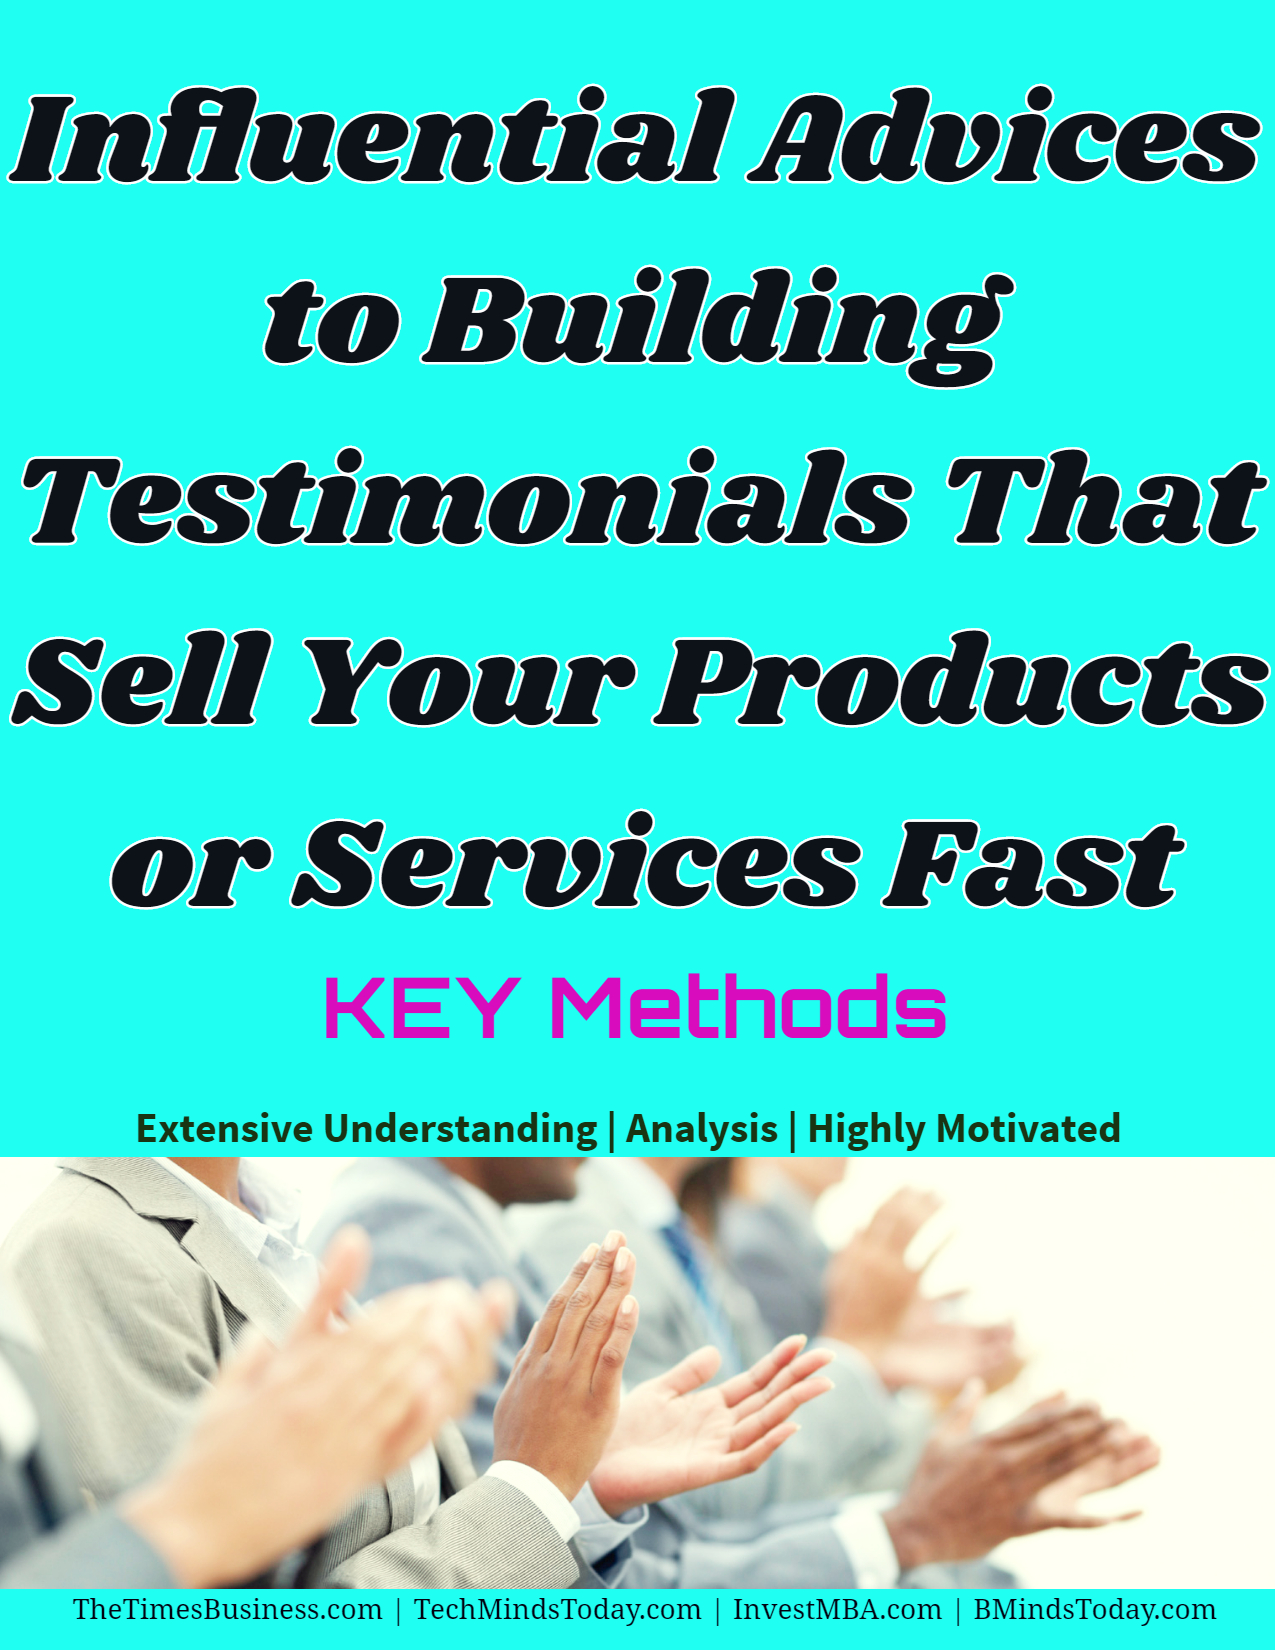 Influential Advices to Building Testimonials That Sell Your Products or Services Fast